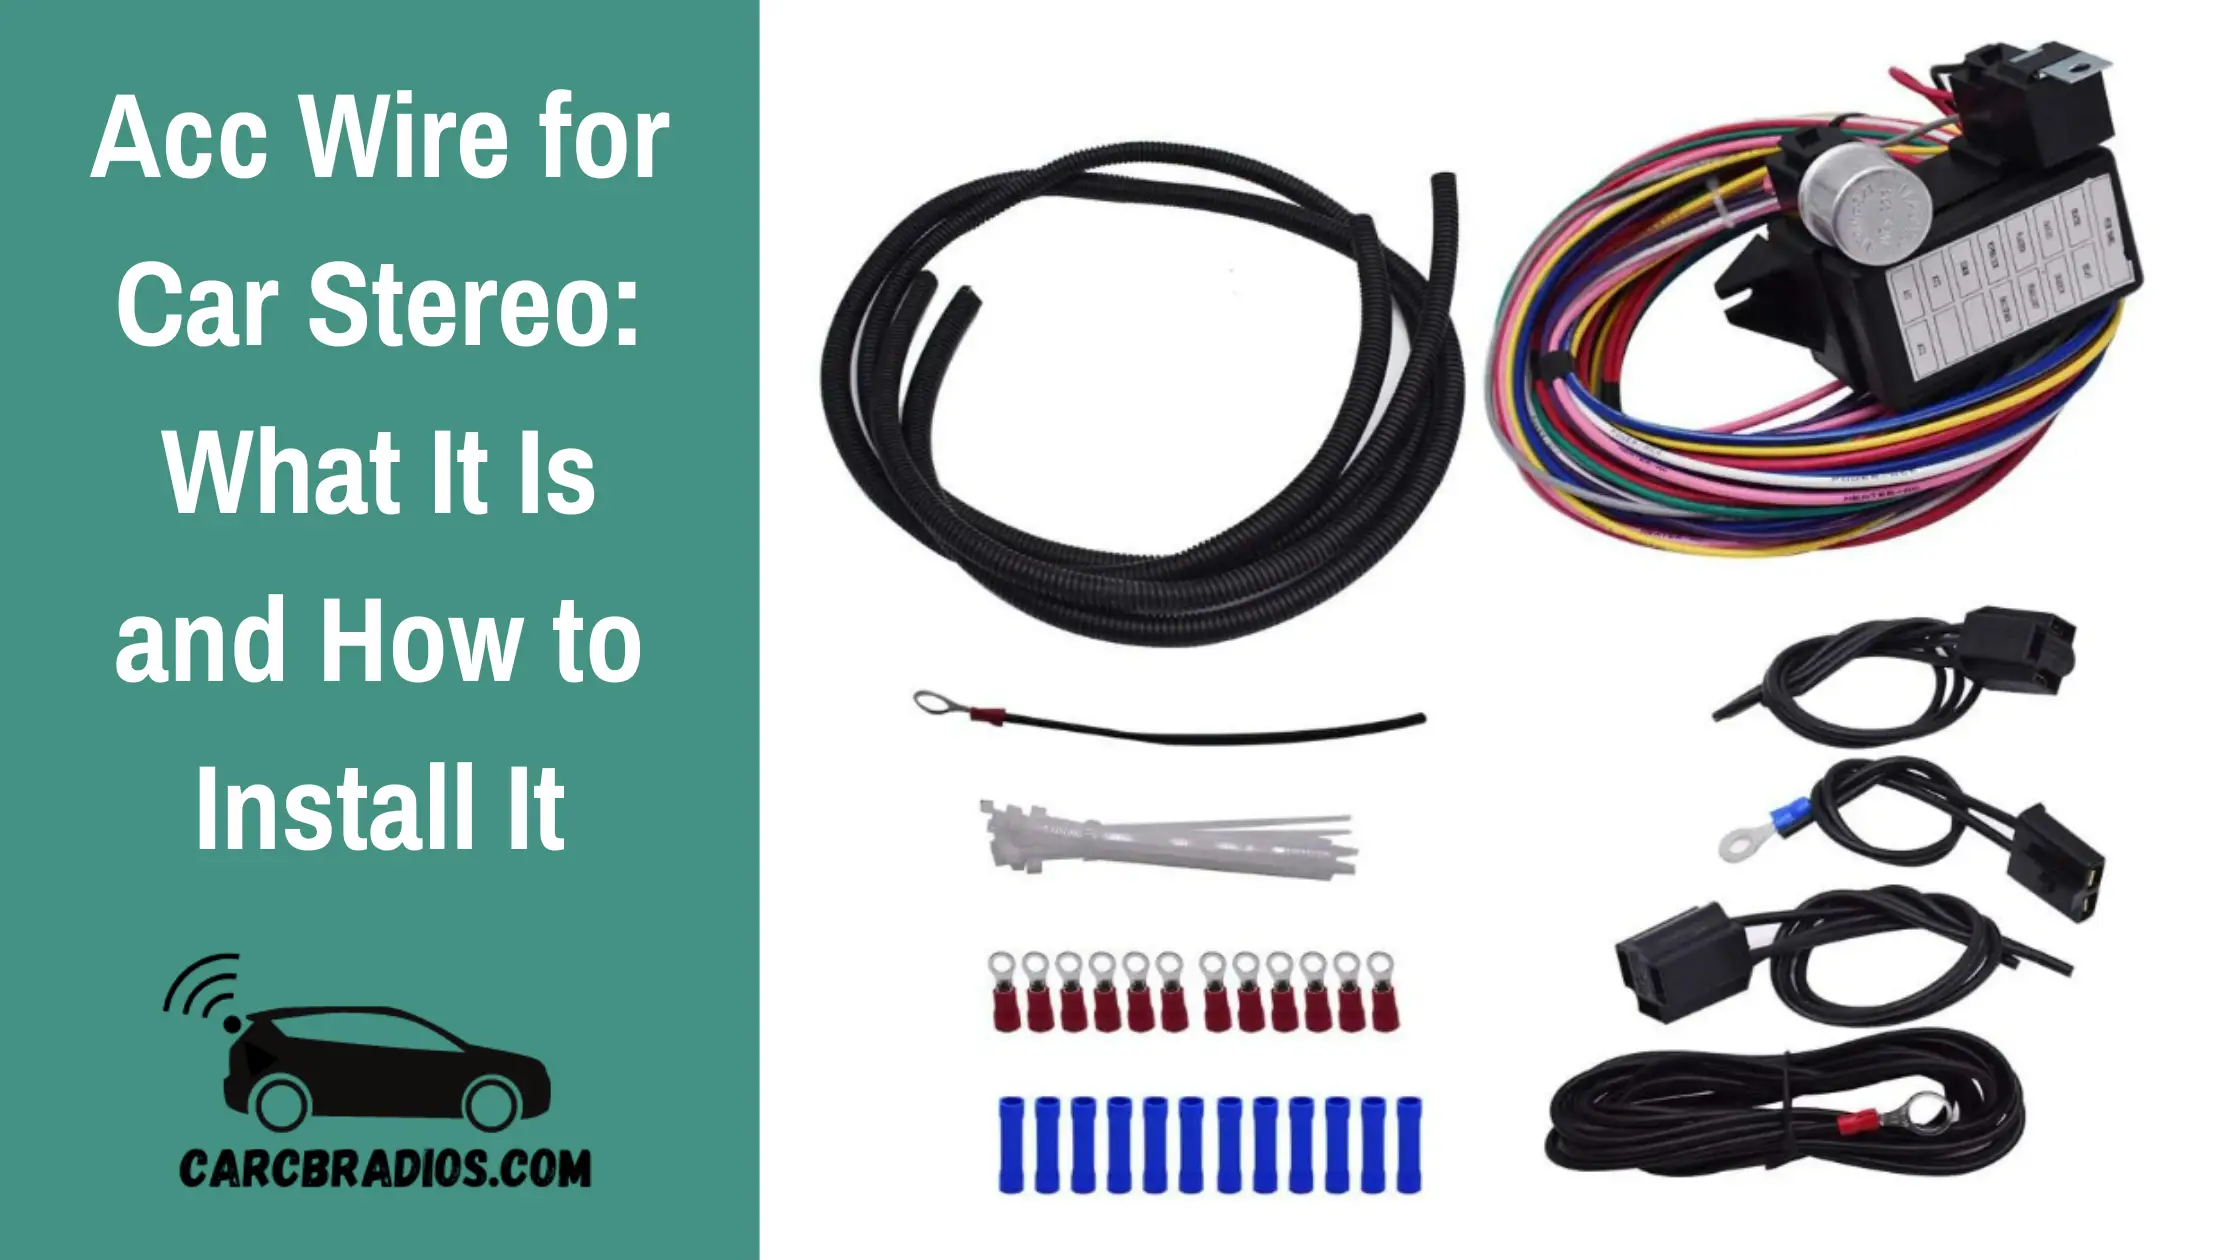 Acc Wire for Car Stereo What It Is and How to Install It